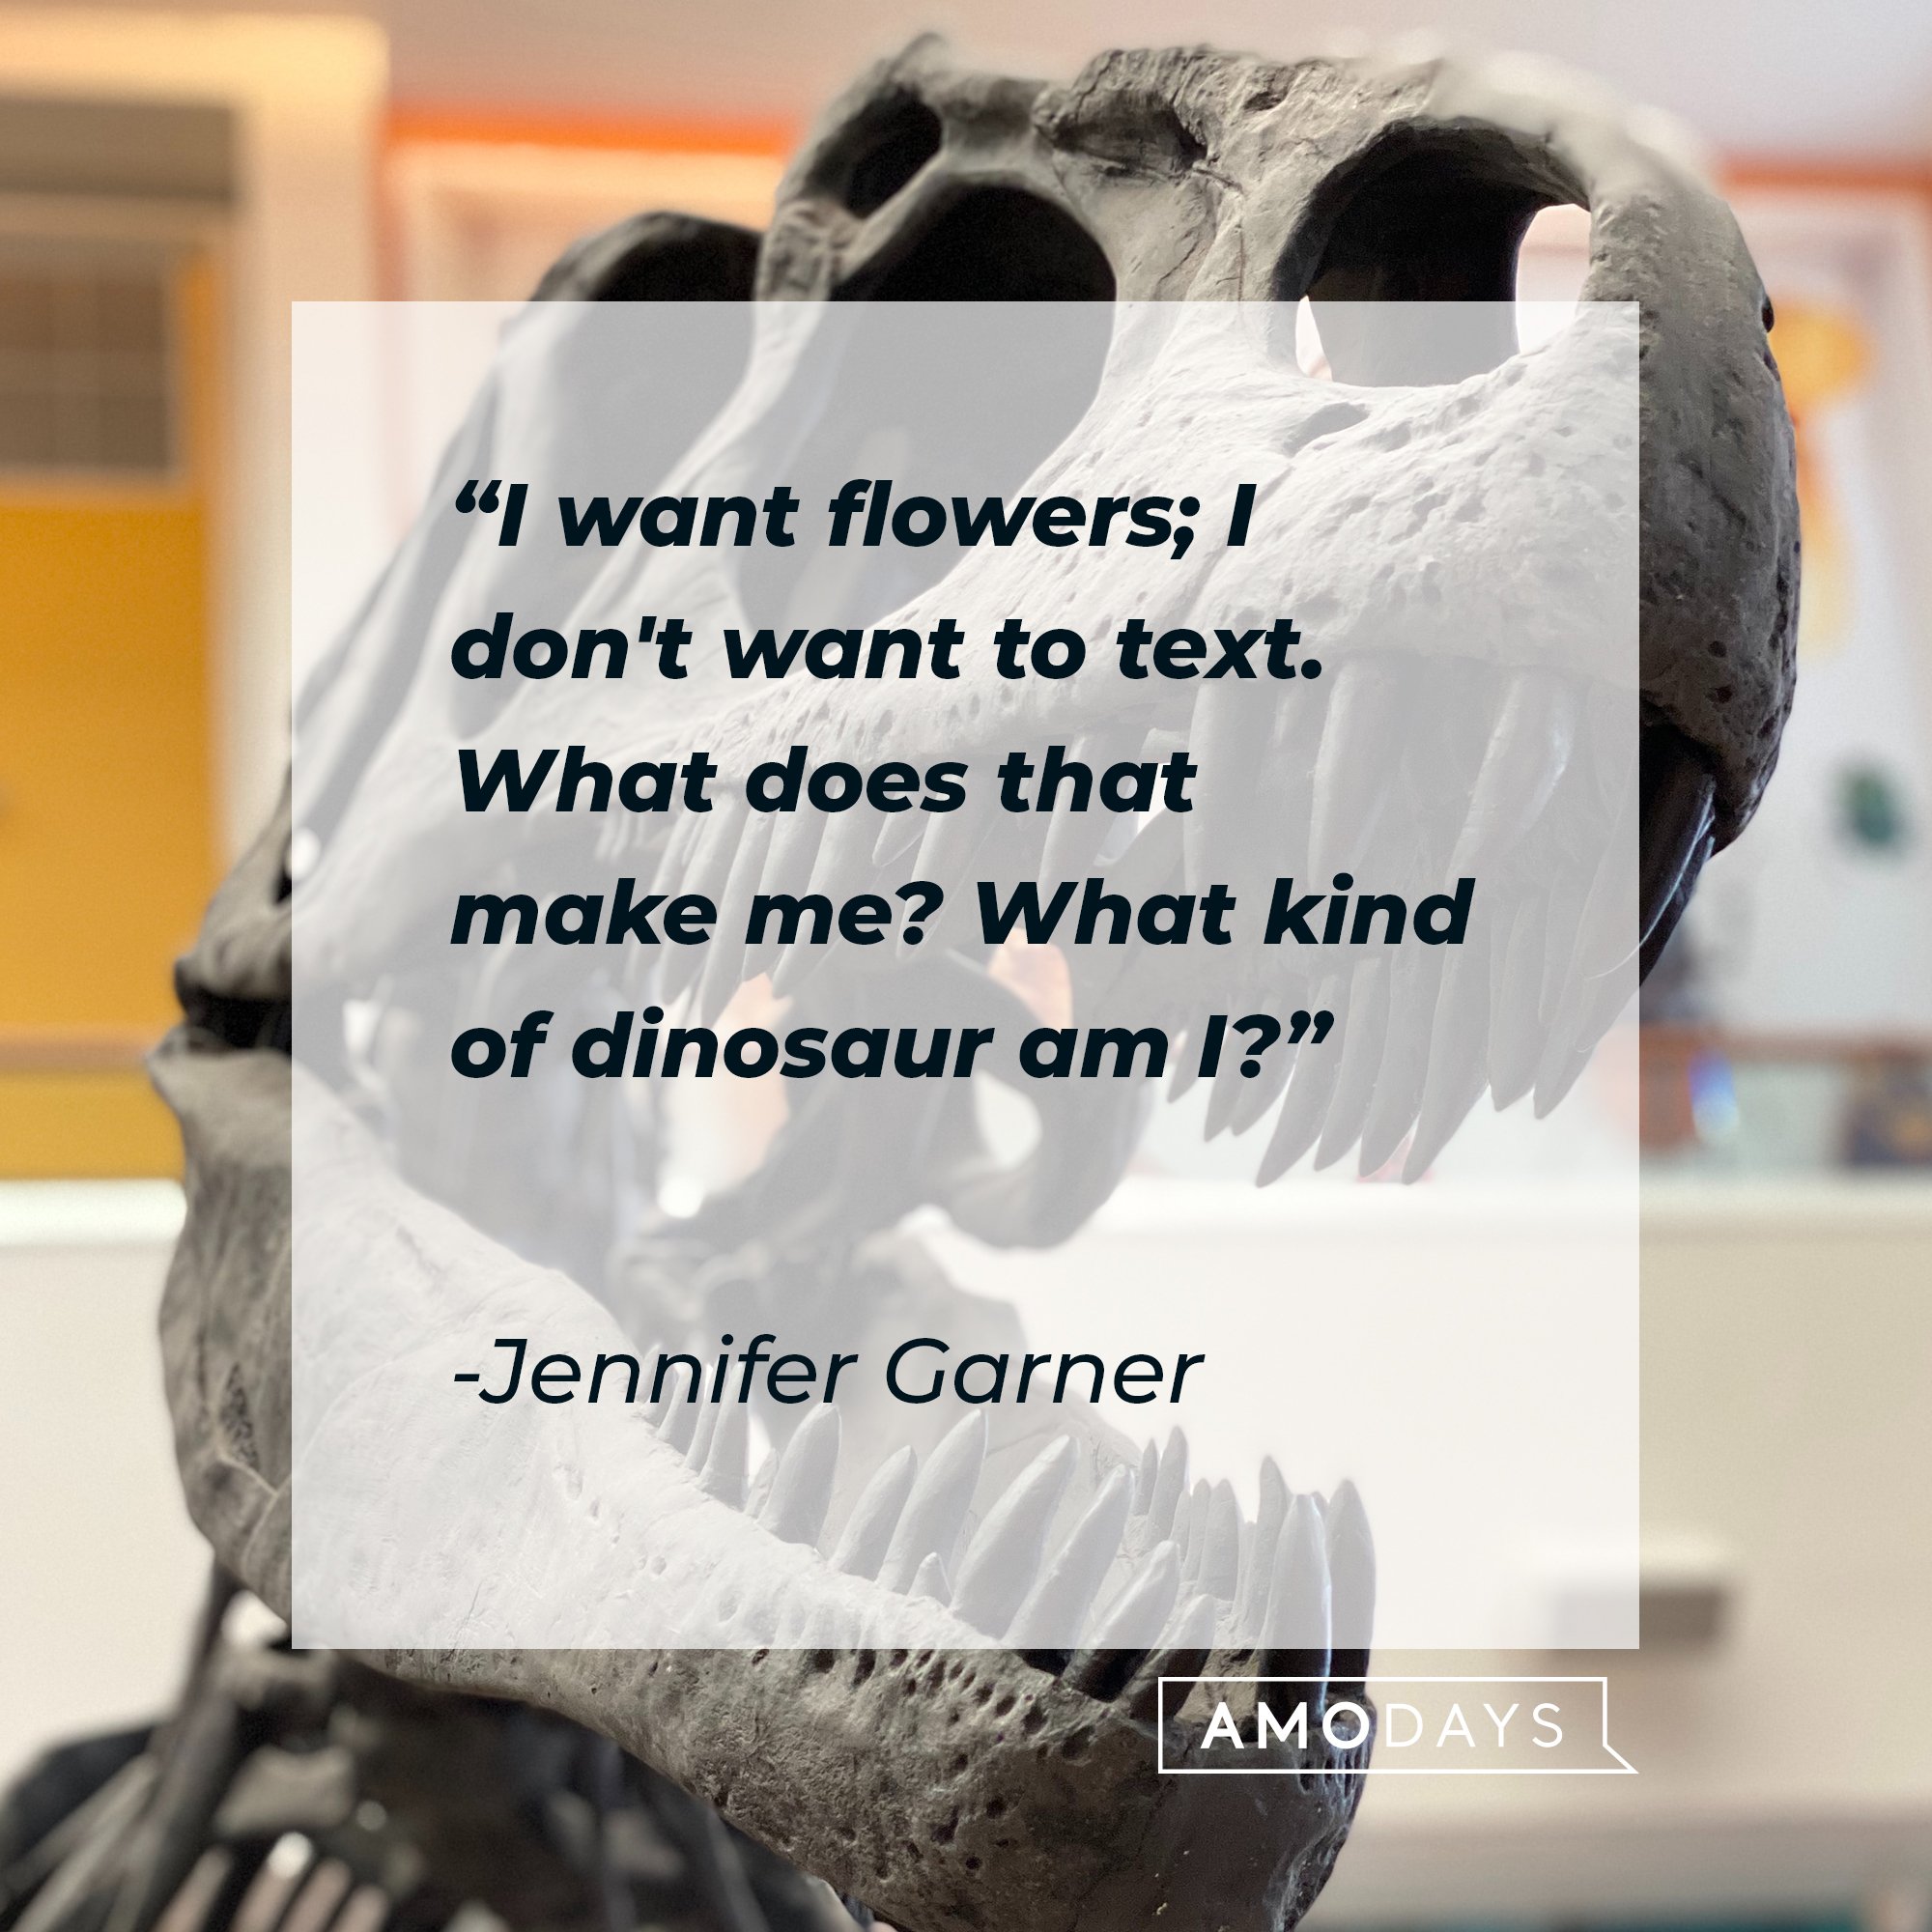 Jennifer Garner’s quote: "I want flowers; I don't want to text. What does that make me? What kind of dinosaur am I?"| Image: AmoDays